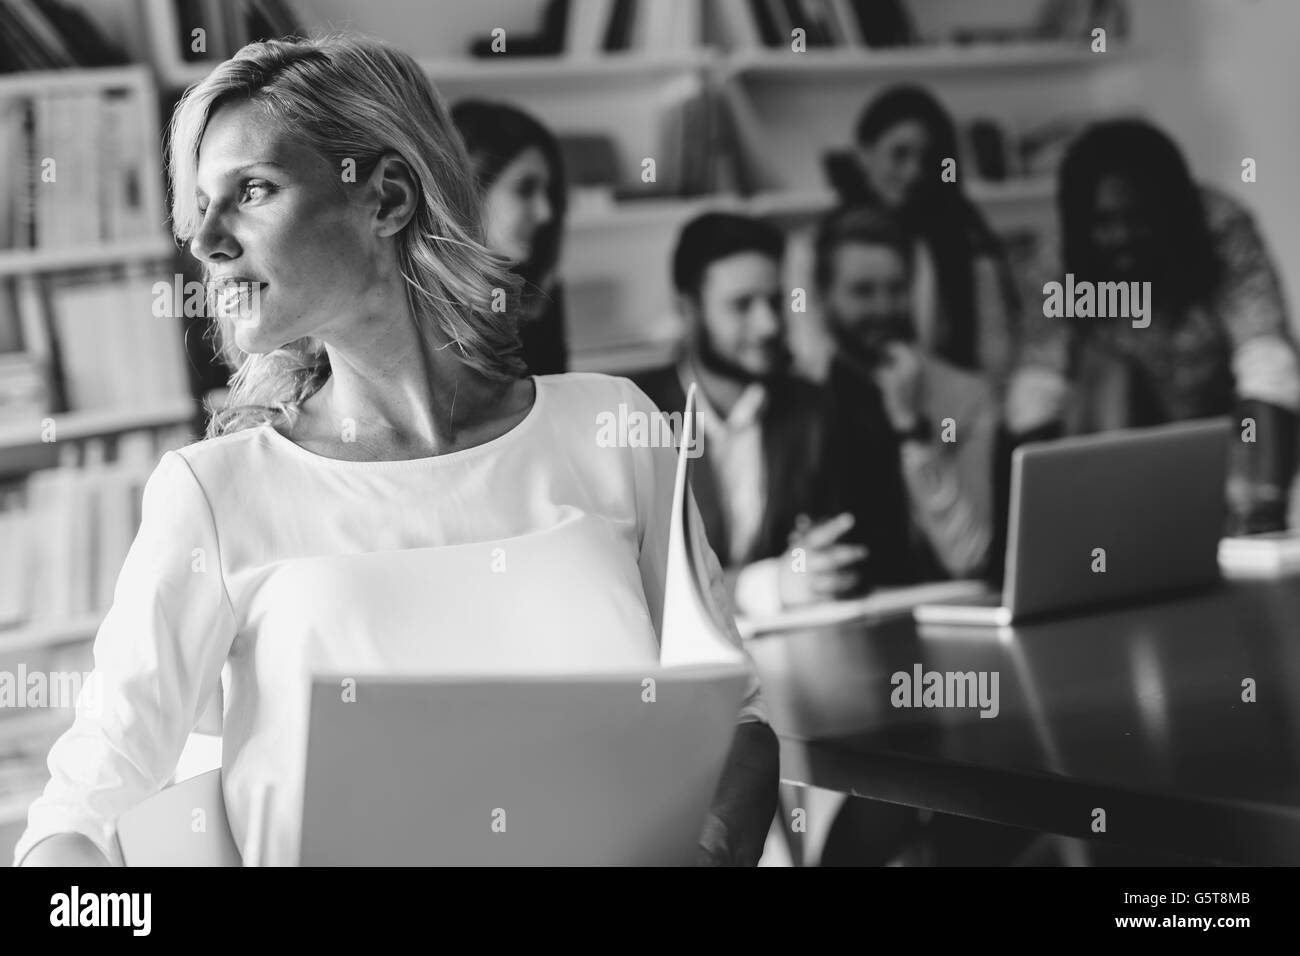 Successful ceo always educating herself to successfully lead company Stock Photo